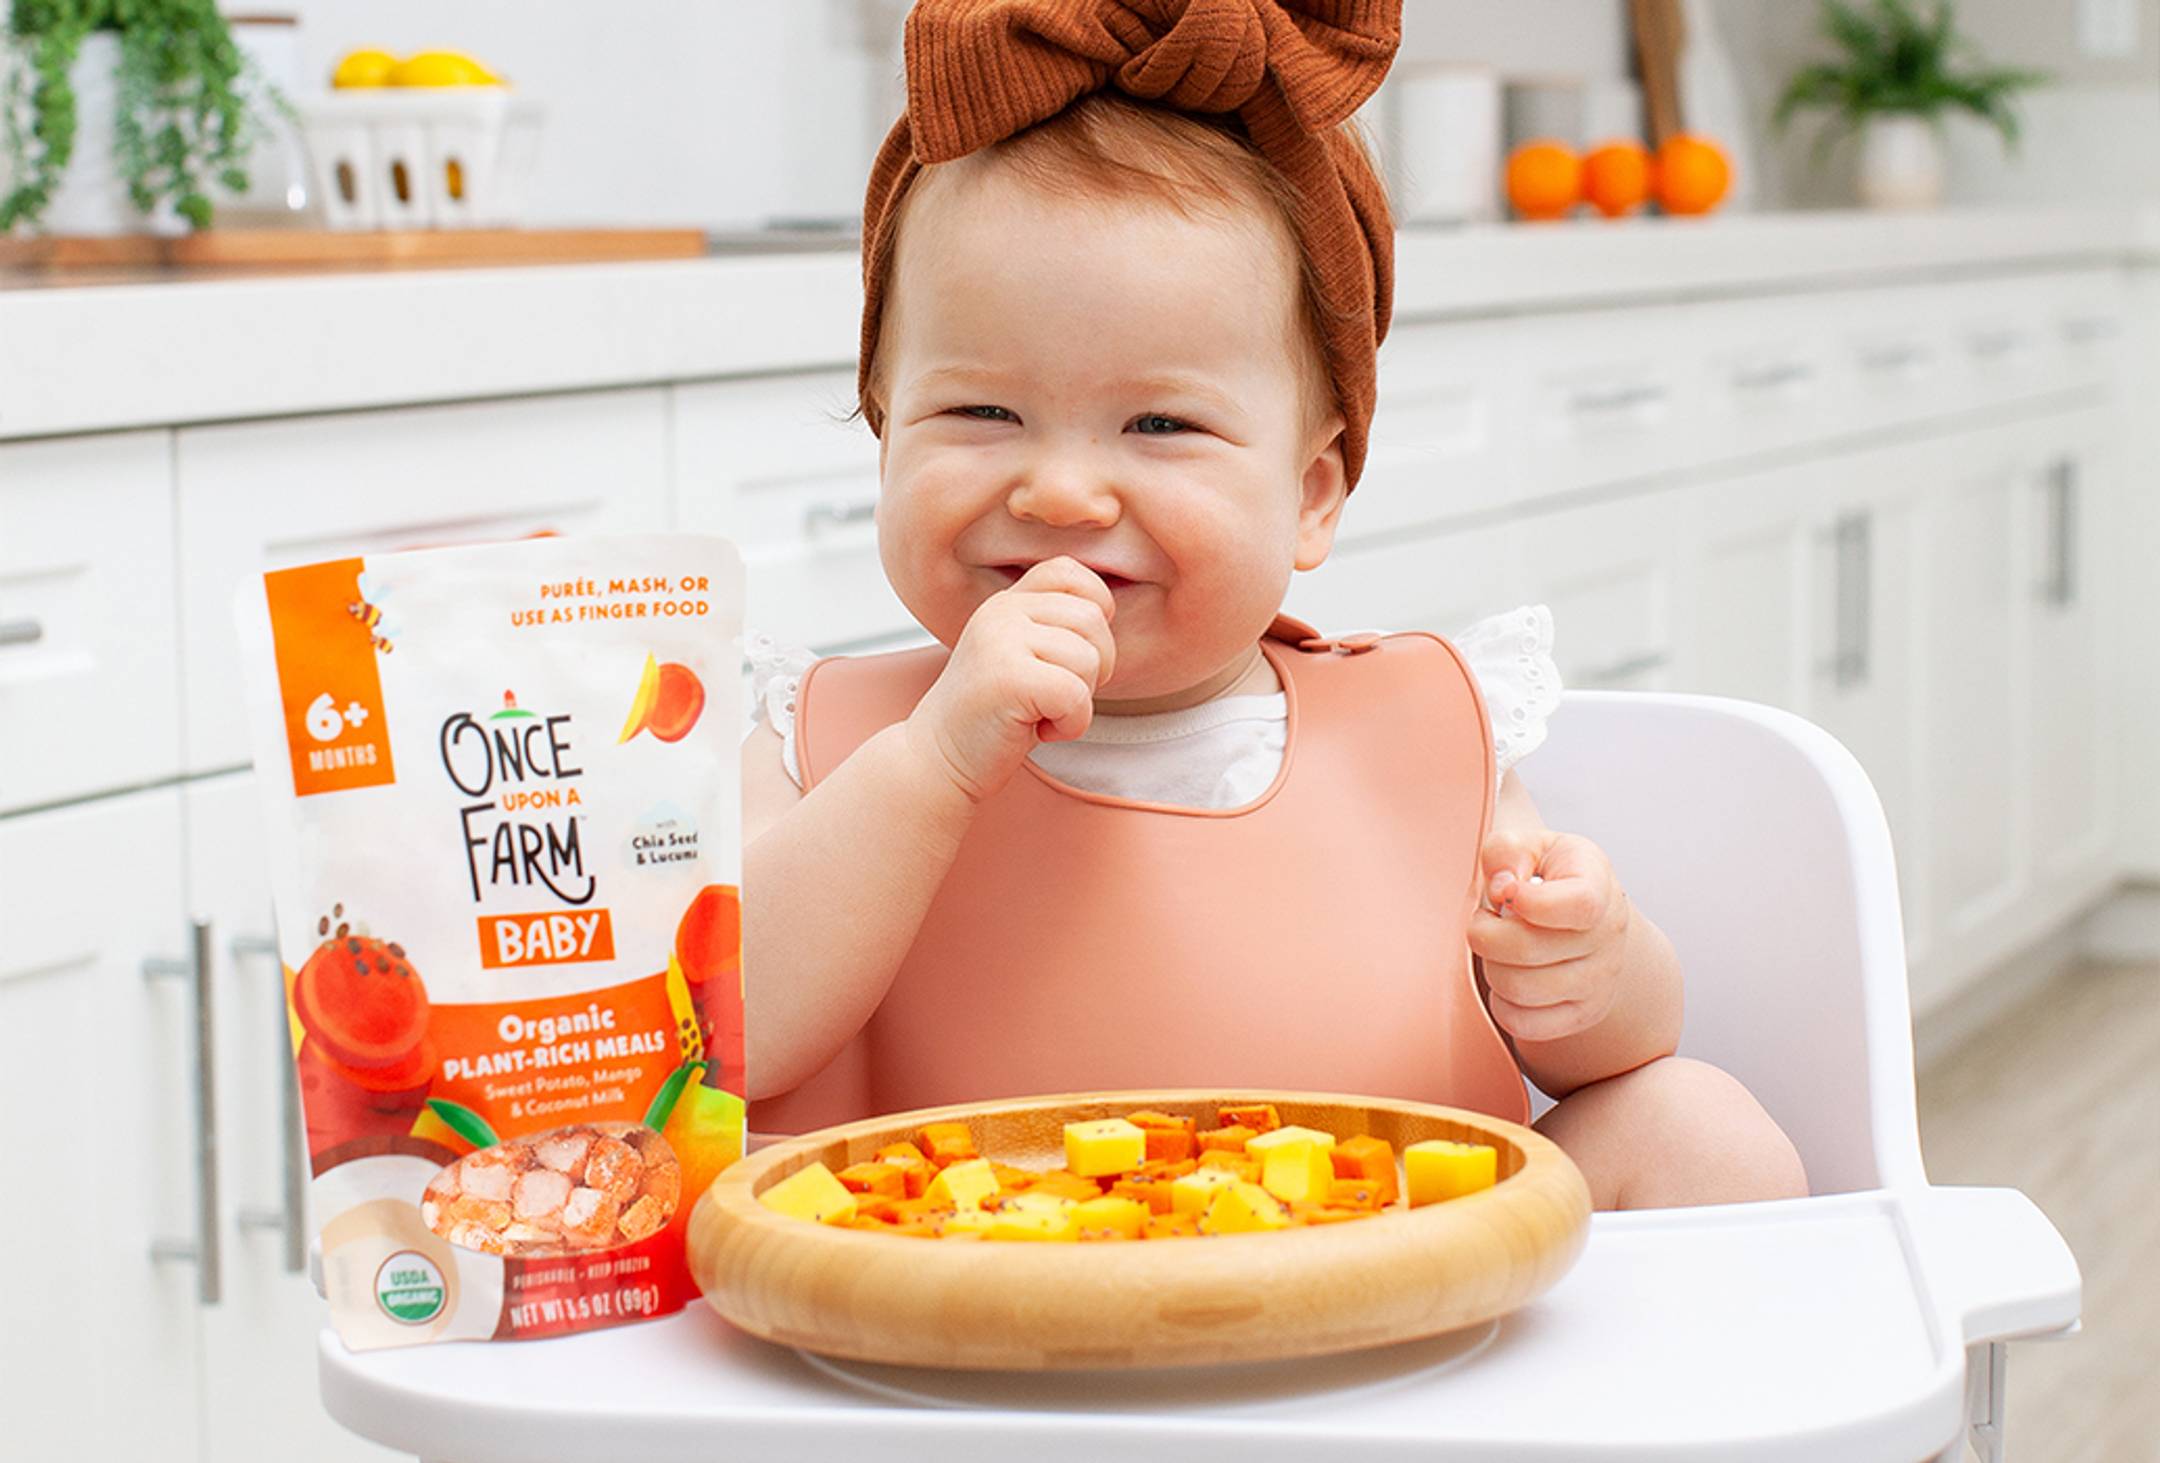 Photo of a baby eating the Sweet Potato, Mango & Coconut Milk meal as finger food.